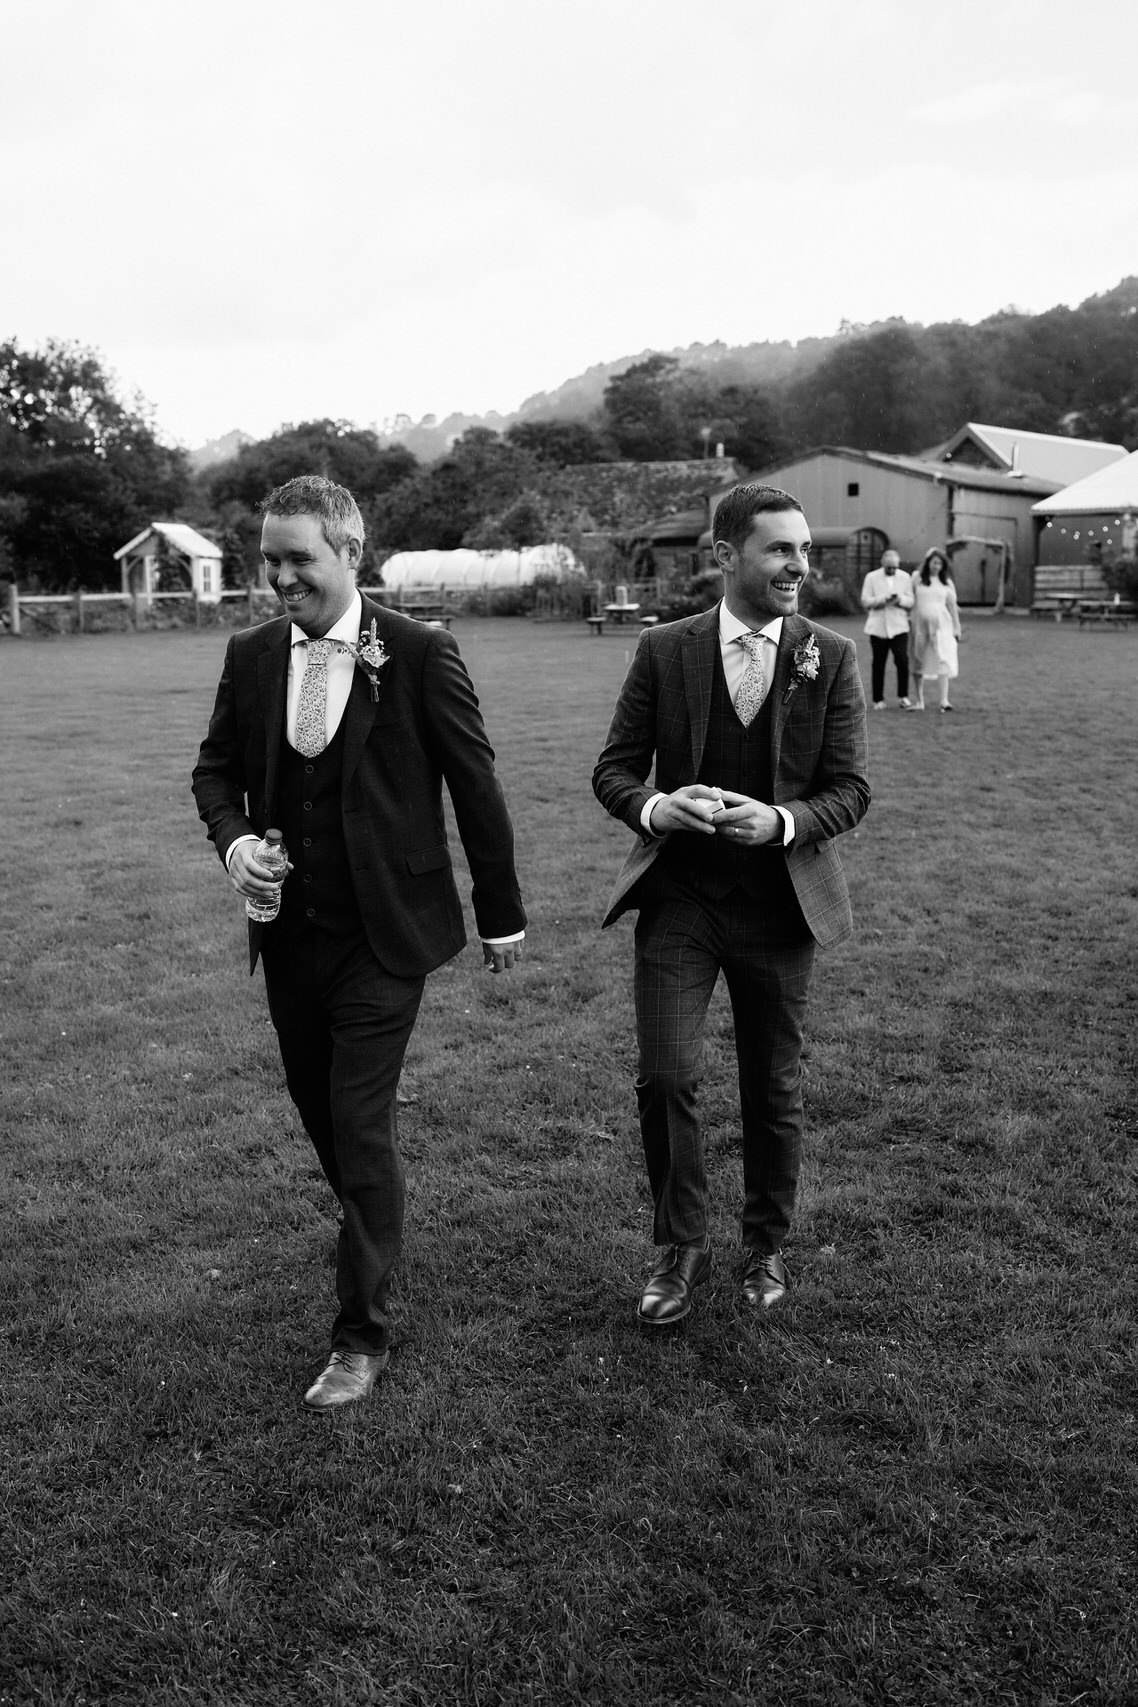 Two guys in formal outfits are strolling through a field.